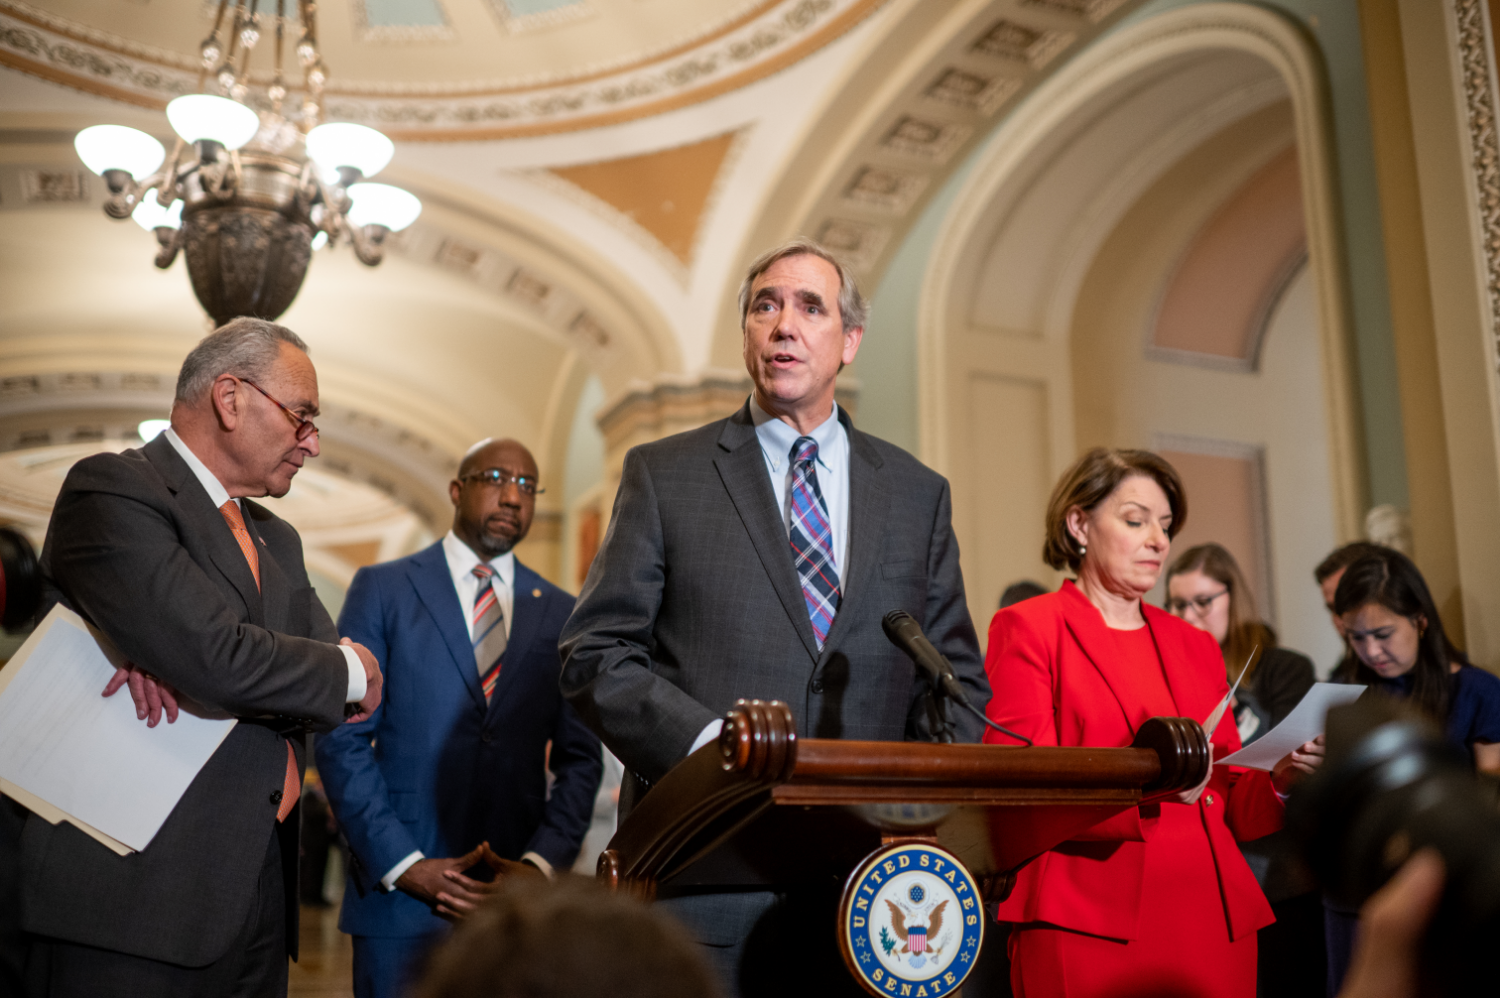 Senator Jeff Merkley speaking at a podium with the seal of the U.S. Senate on the front.